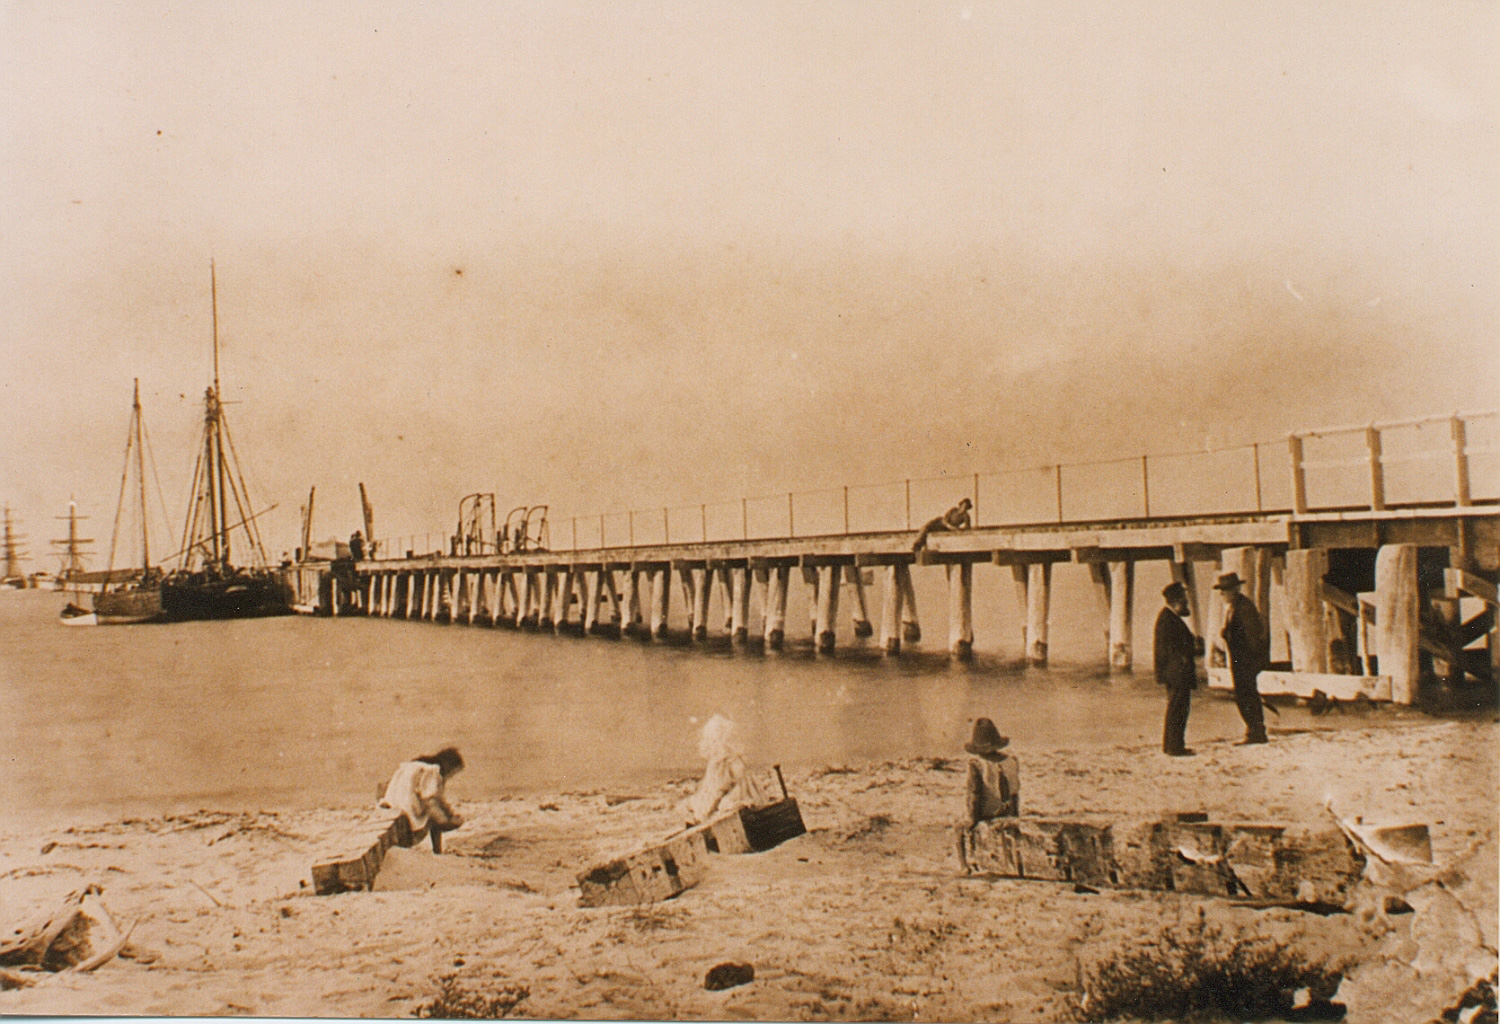 Earliest known photo of the Jetty showing a singular sail ship and children playing on the beach - Jetty History.